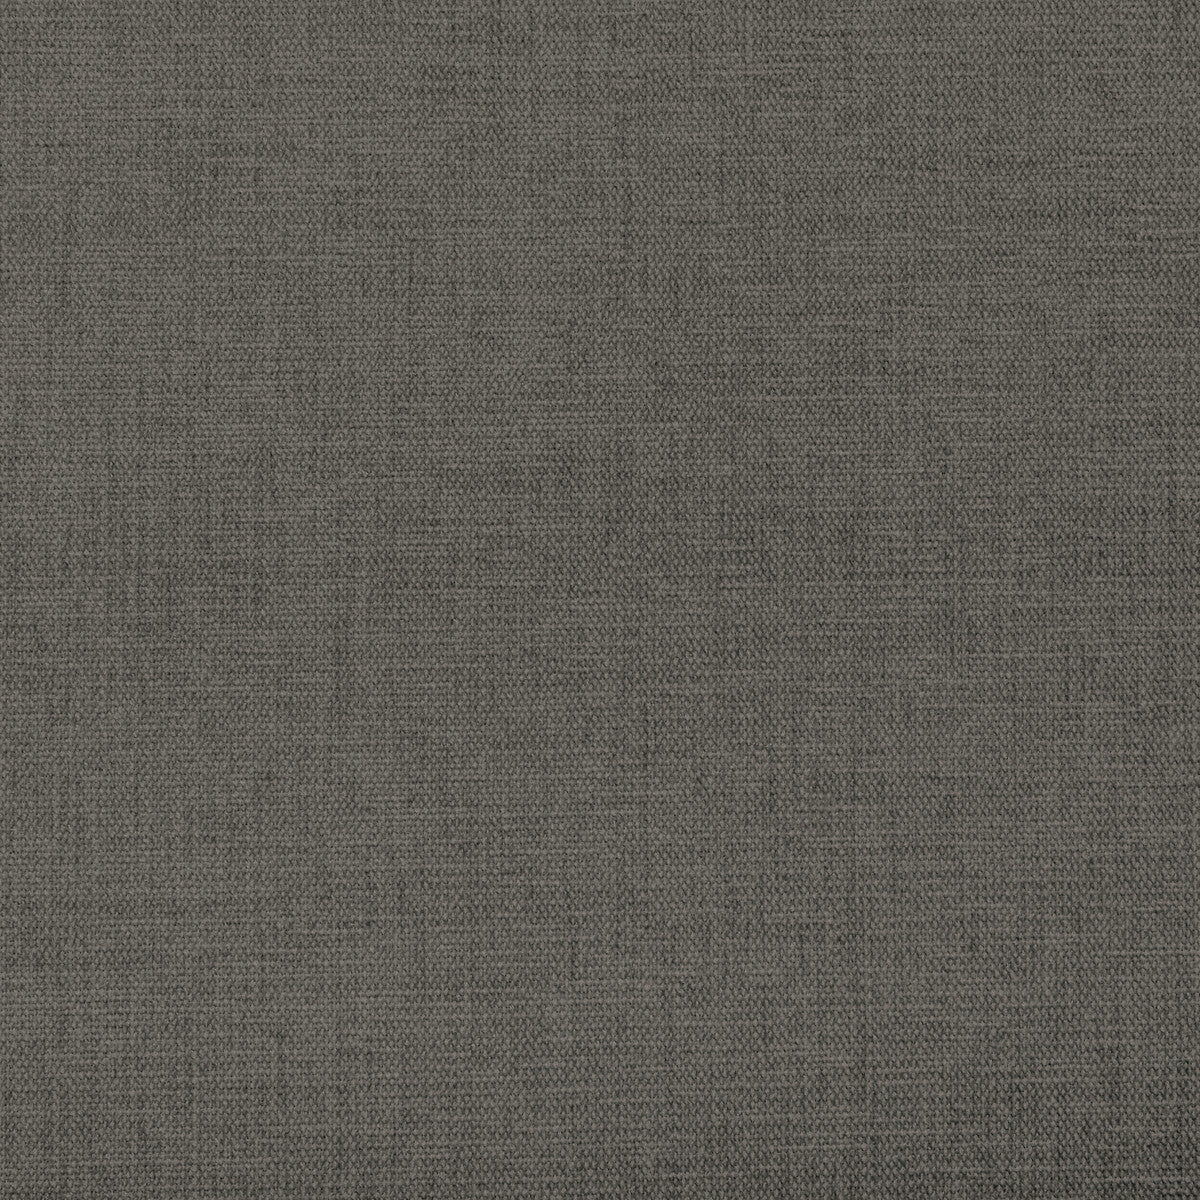 Kravet Contract fabric in 34961-1152 color - pattern 34961.1152.0 - by Kravet Contract in the Performance Kravetarmor collection